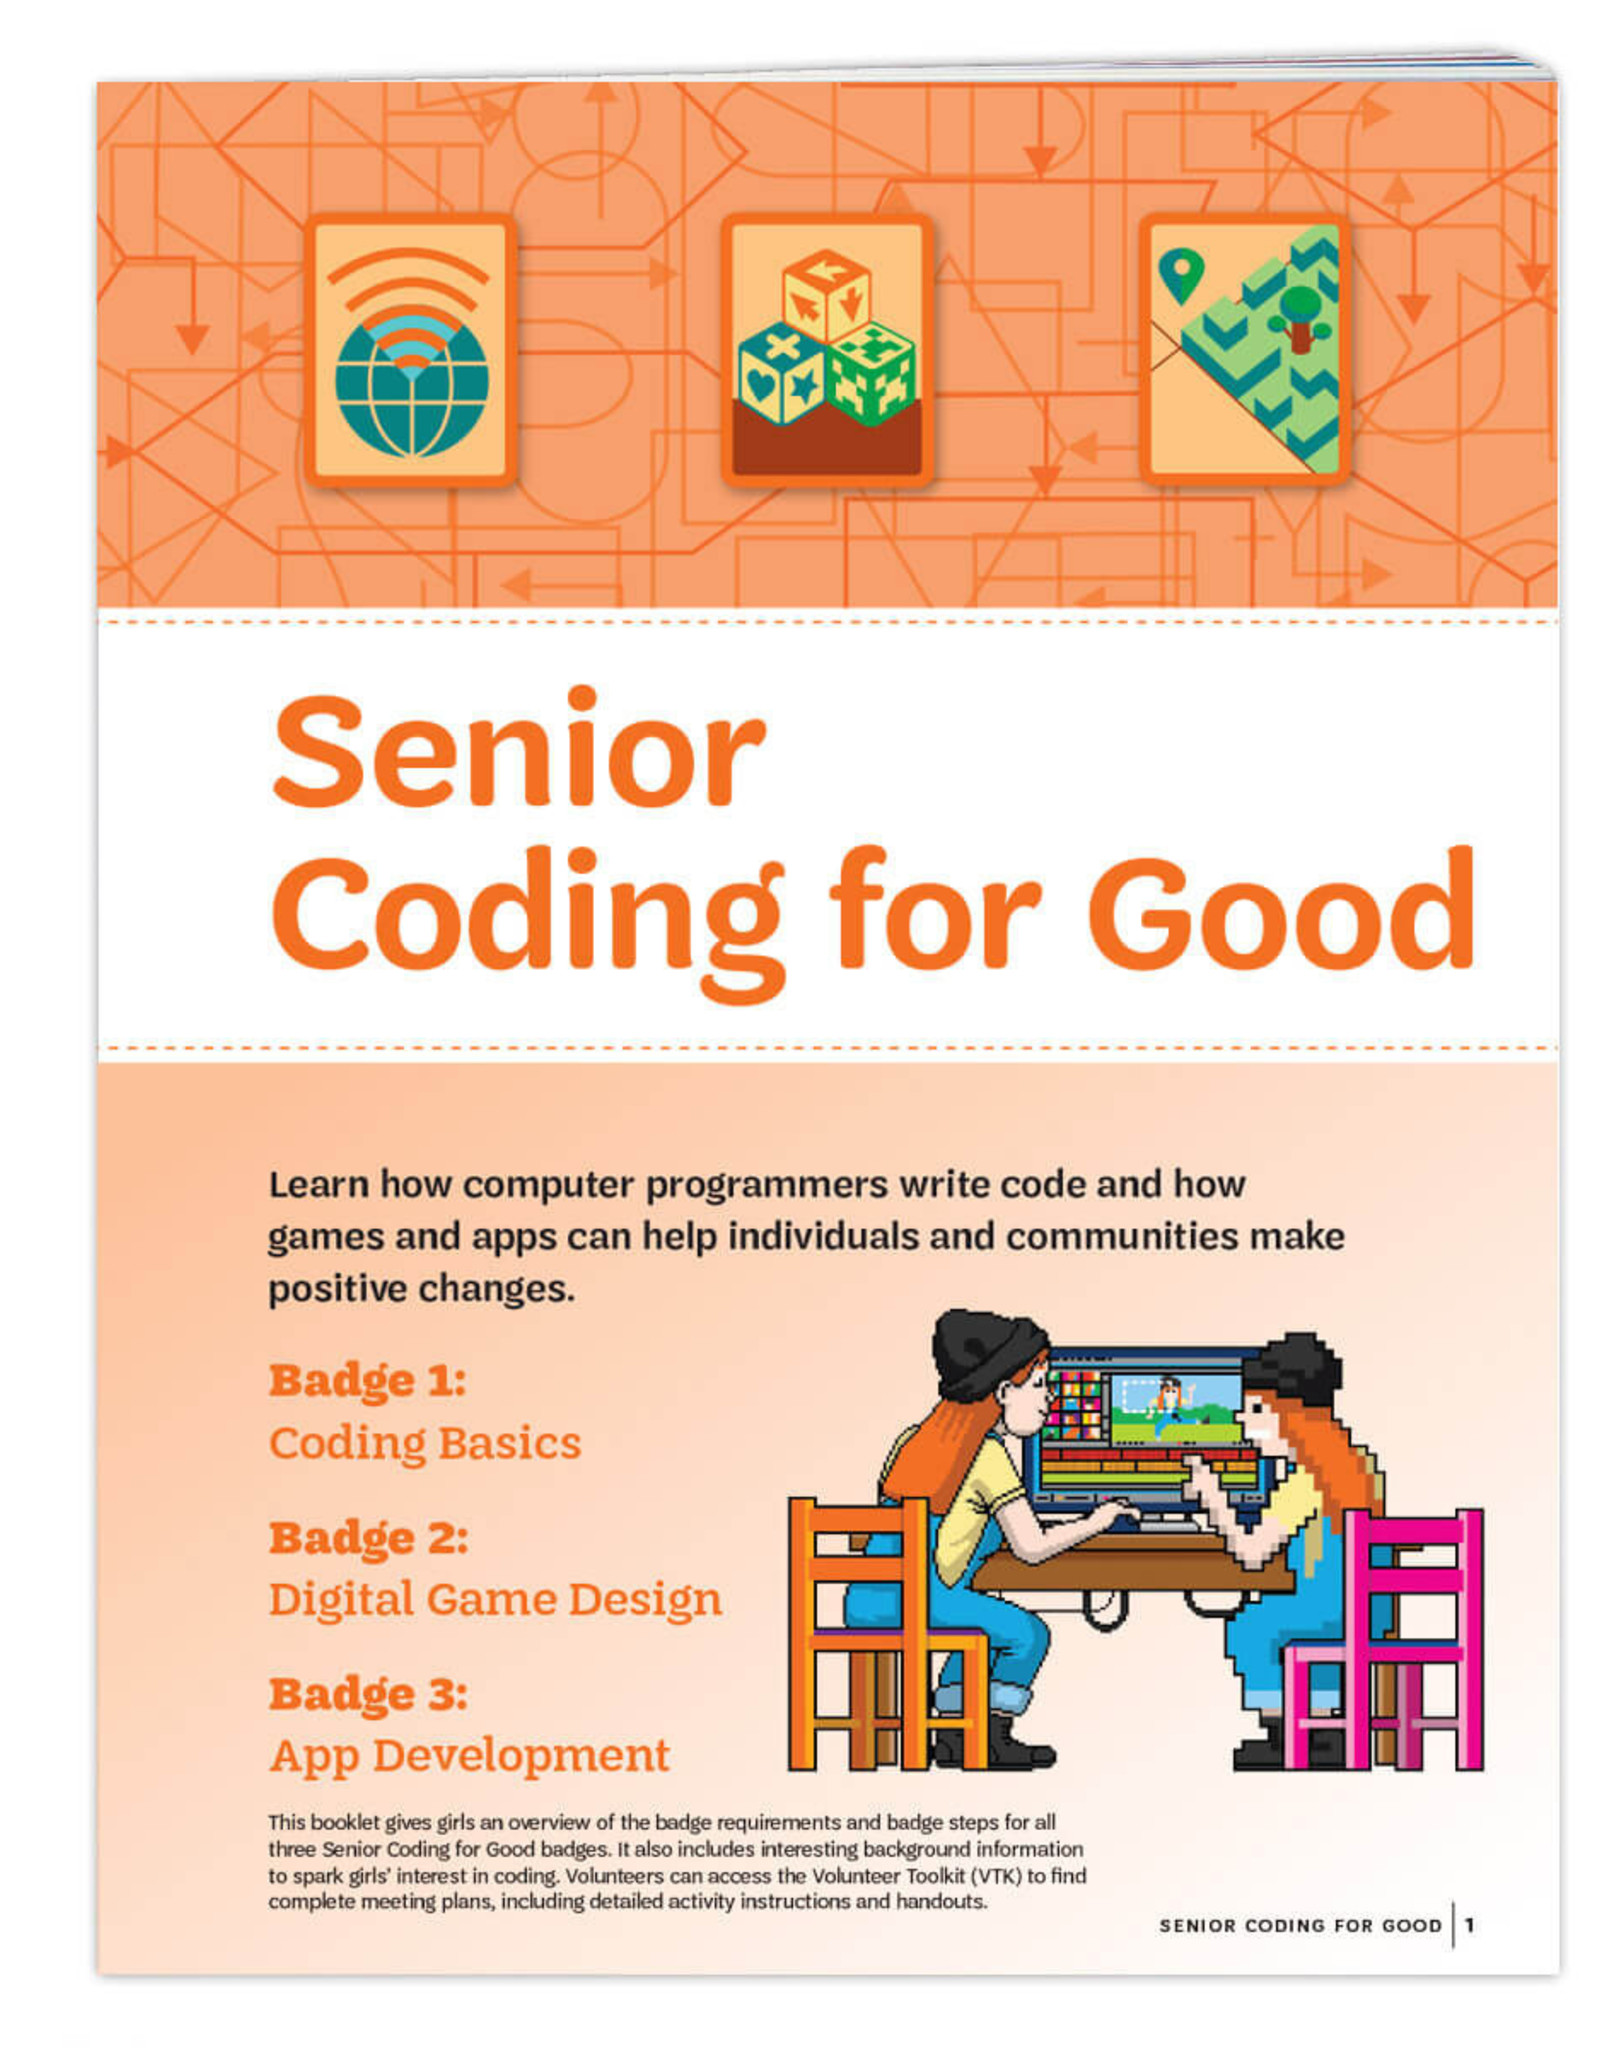 GIRL SCOUTS OF THE USA Senior Coding For Good Requirements Pamphlet